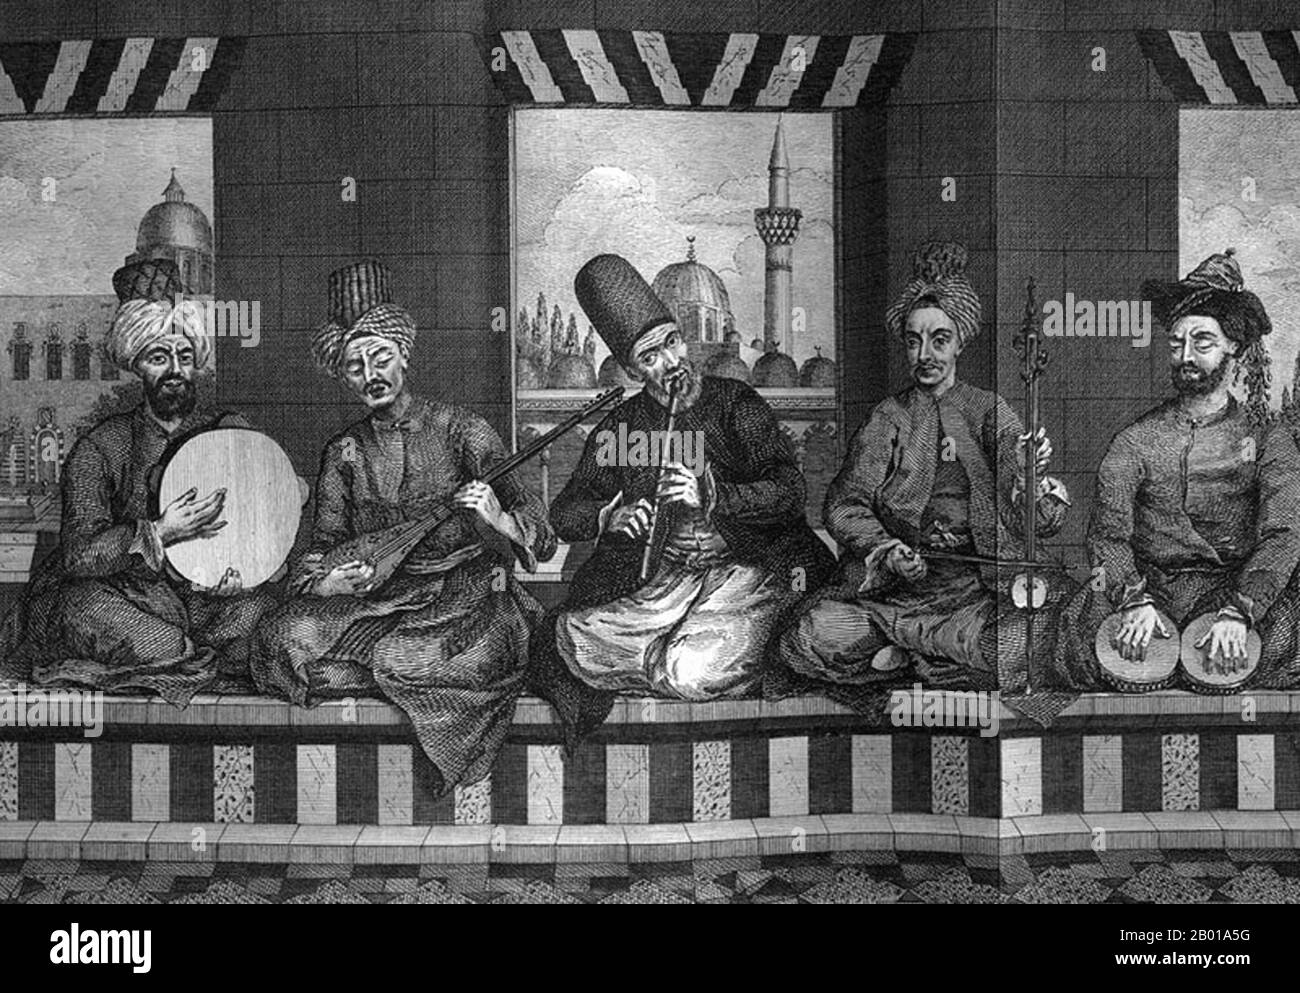 Syria: Musicians of Aleppo (Haleb), late 18th century.  Aleppo is considered one of the main centres of Arabic traditional and classic music with the famous Aleppine Muwashshahs, Qudoods and Maqams (religious and secular poetic-musical genres). Aleppines in general are fond of Arab classical music, the Tarab, and it is not a surprise that many artists from Aleppo are considered pioneers among the Arabs in classic and traditional music. The most prominent figures in this field are Sabri Mdallal, Sabah Fakhri, Shadi Jameel, Abed Azrie and Nour Mhanna. Stock Photo